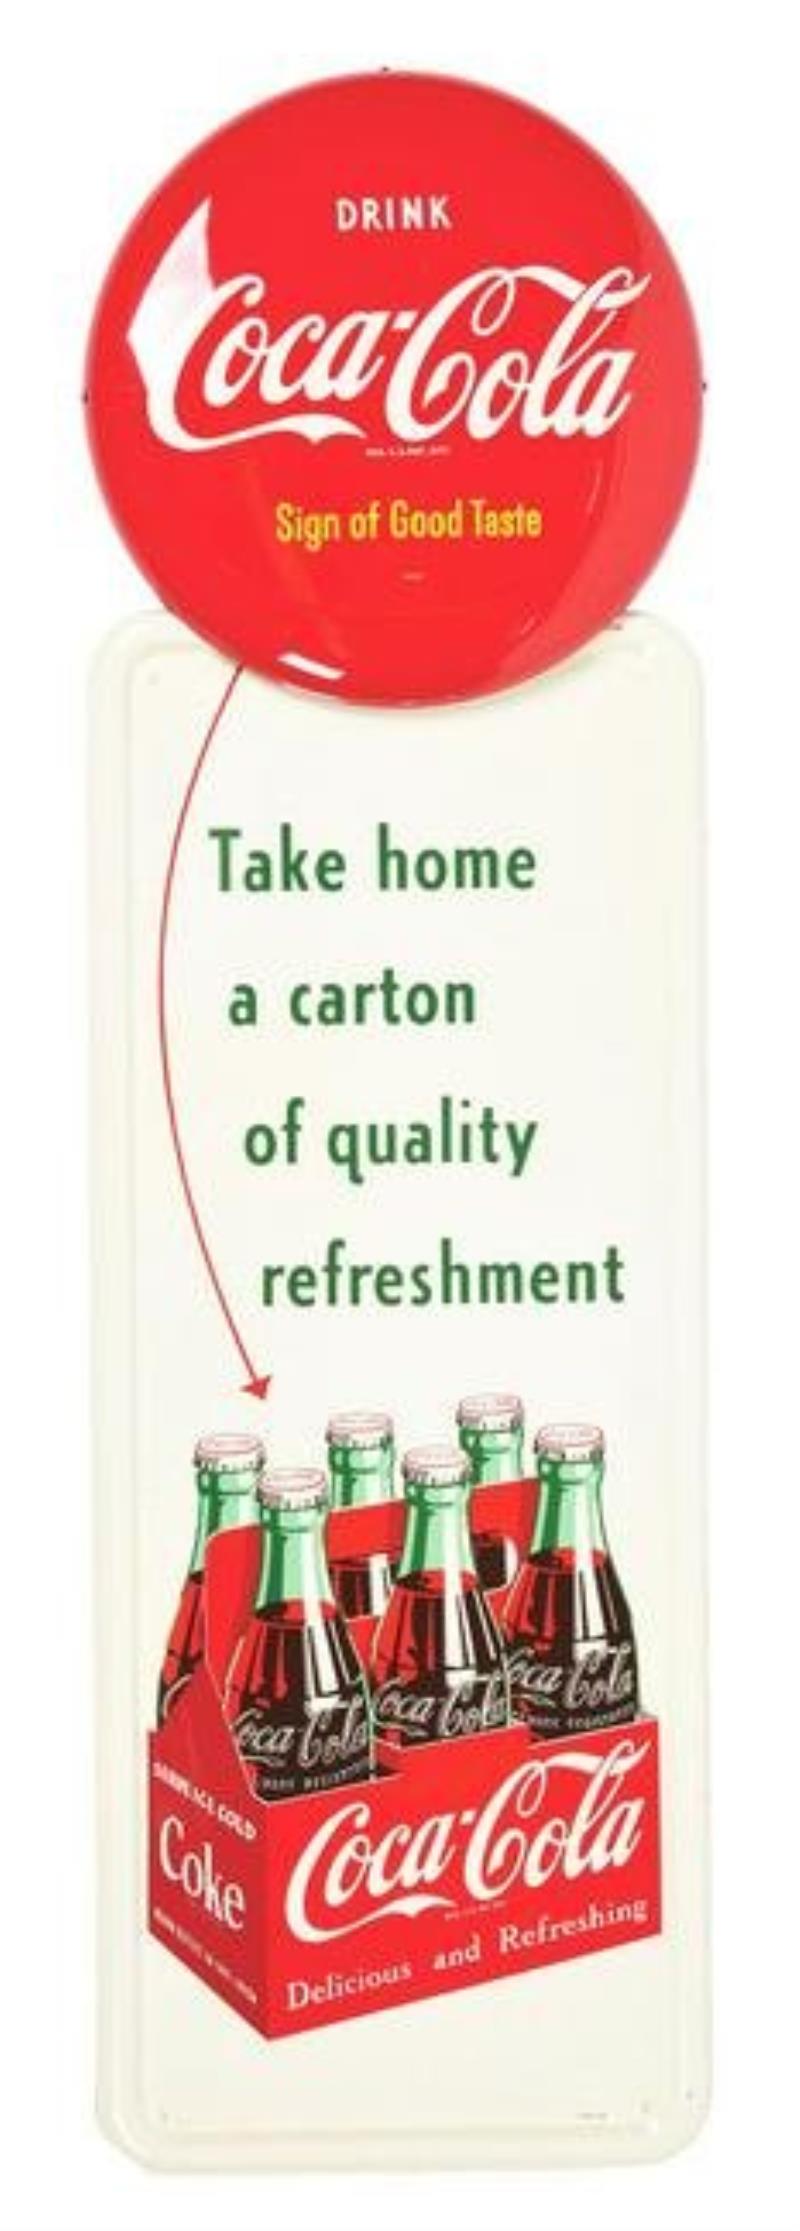 SINGLE-SIDED SELF FRAMED TIN SIGN ADVERTISING COCA-COLA